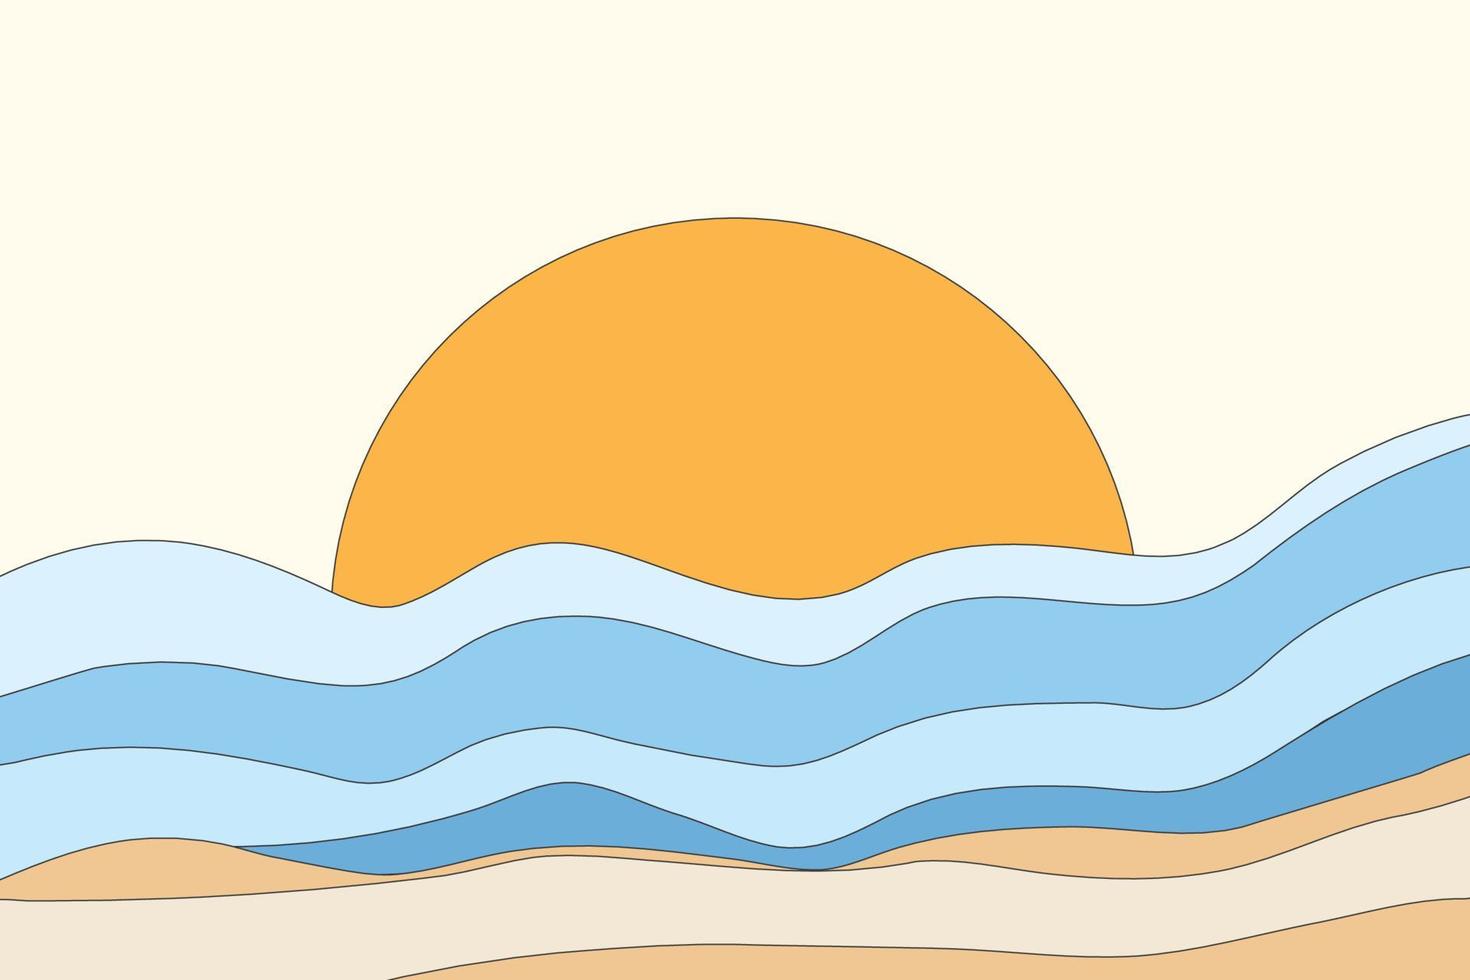 The landscape of sea wave structure background. Orange circle looks like a sun wallpaper in an abstract style vector